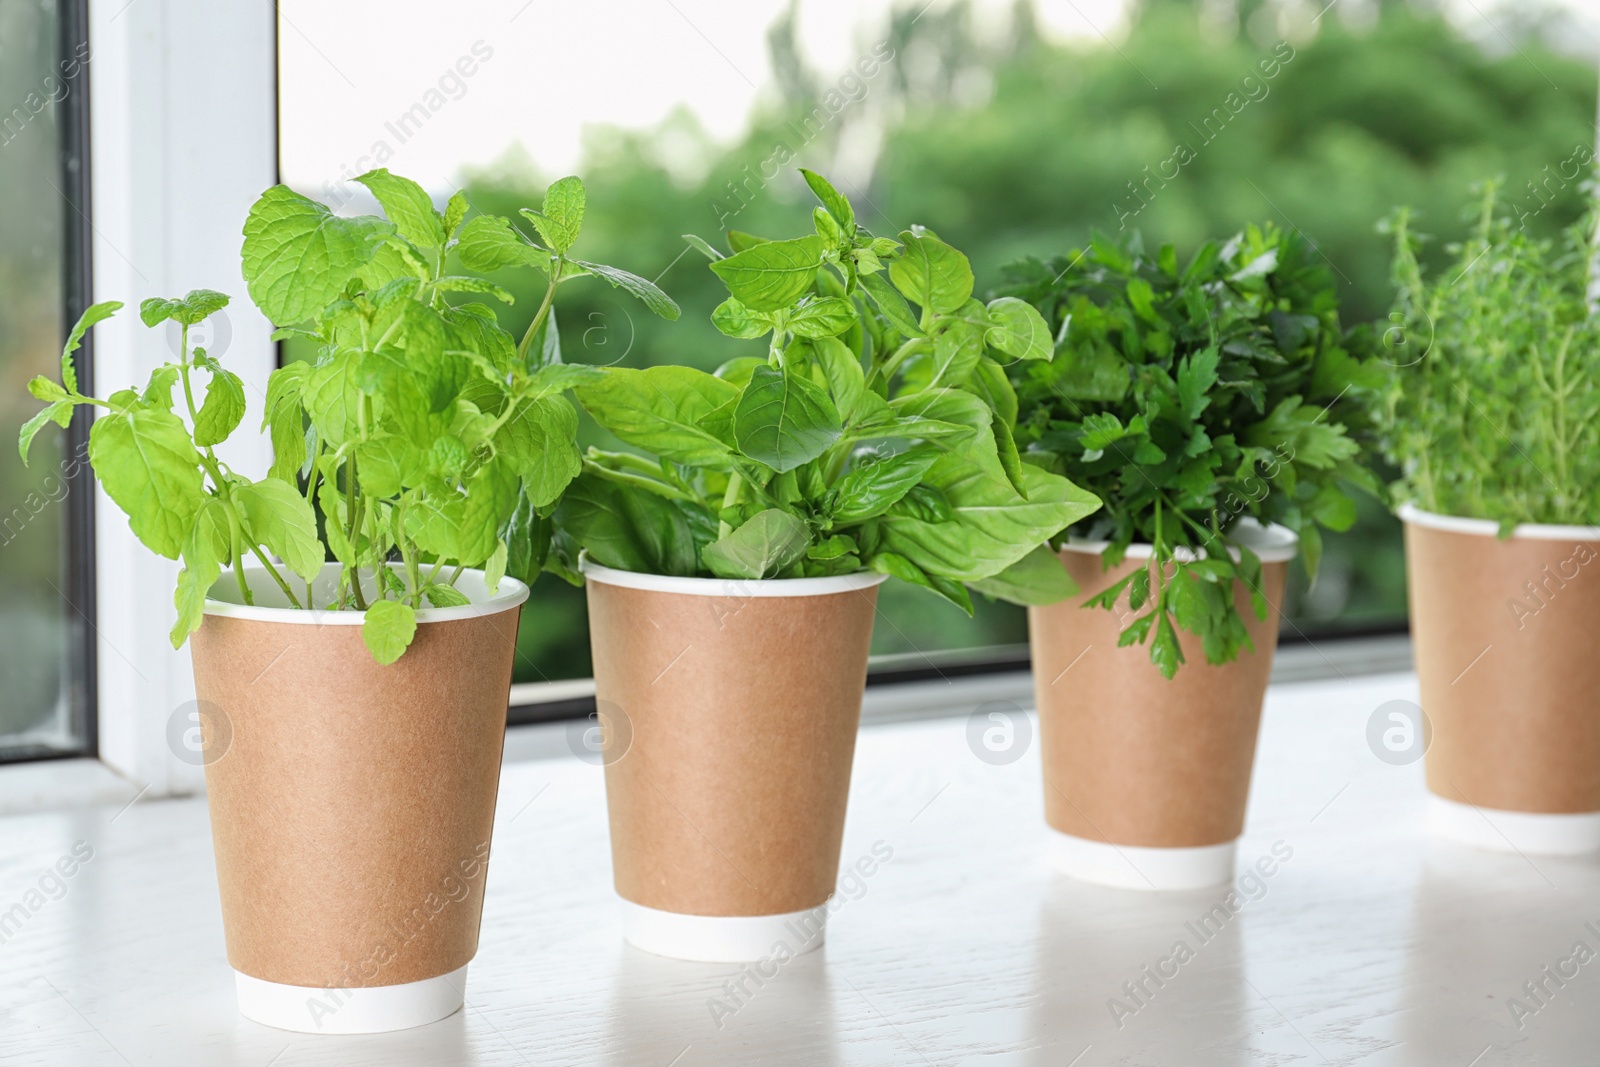 Photo of Seedlings of different aromatic herbs in paper cups on white wooden window sill